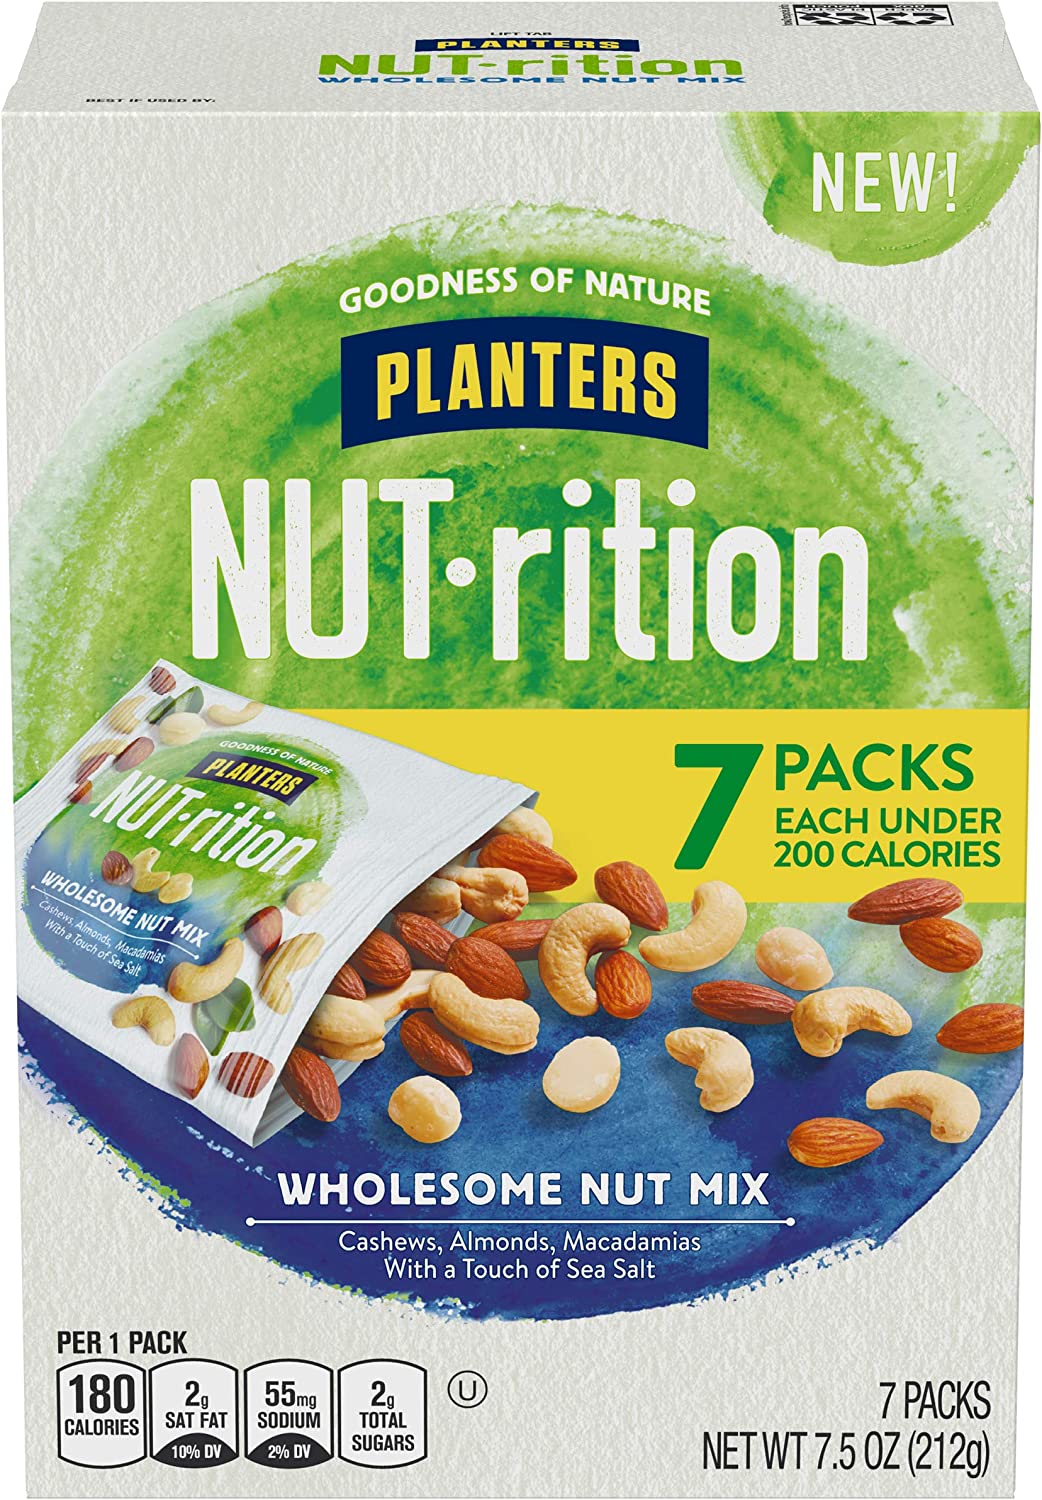 PLANTERS NUT-rition Wholesome Nut Mix, 7.5 oz Box (Contains 7 Individual Pouches) - Cashews, Almonds and Macadamias Snack Mix - No Artificial Flavors, No Artificial Colors, No Preservatives - Kosher